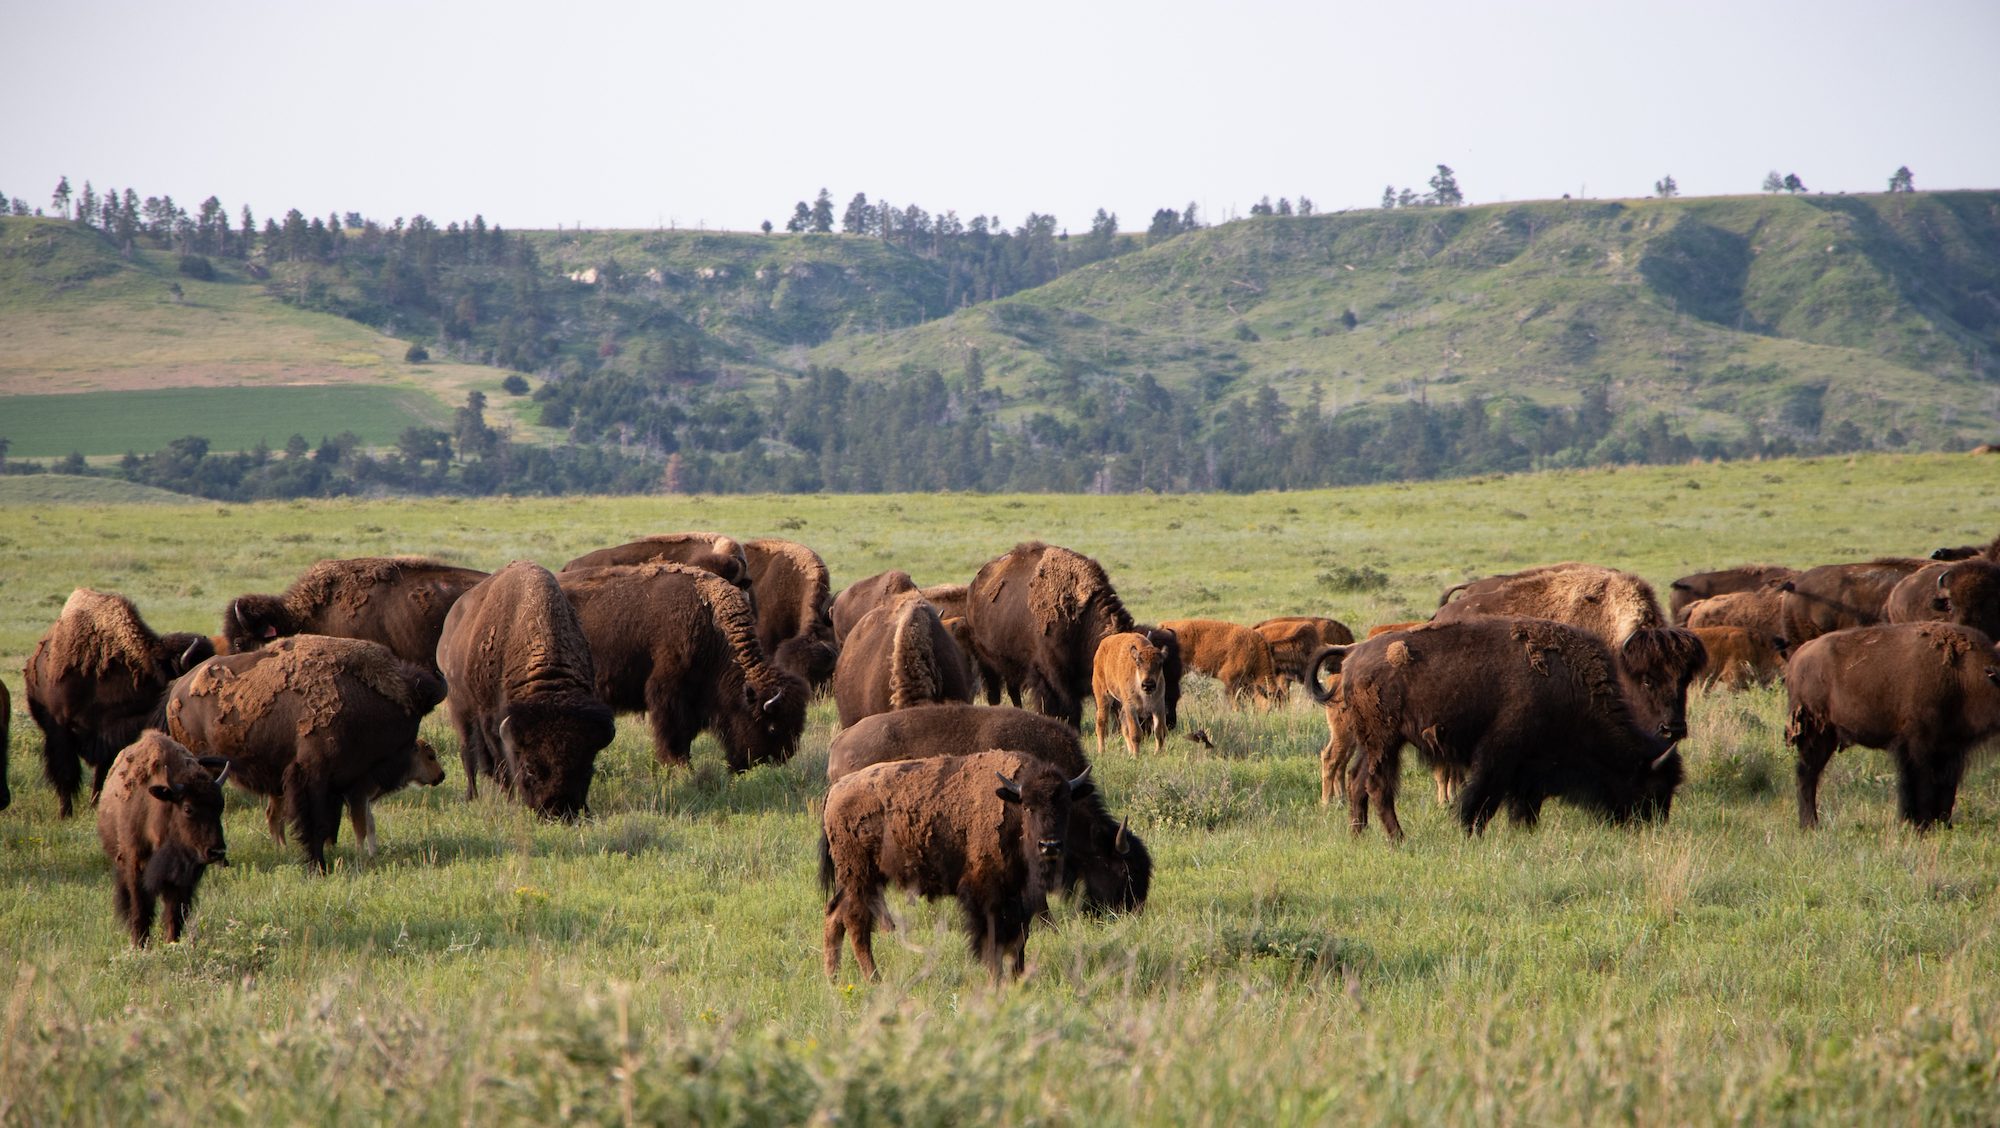 Herd of bison in the grass